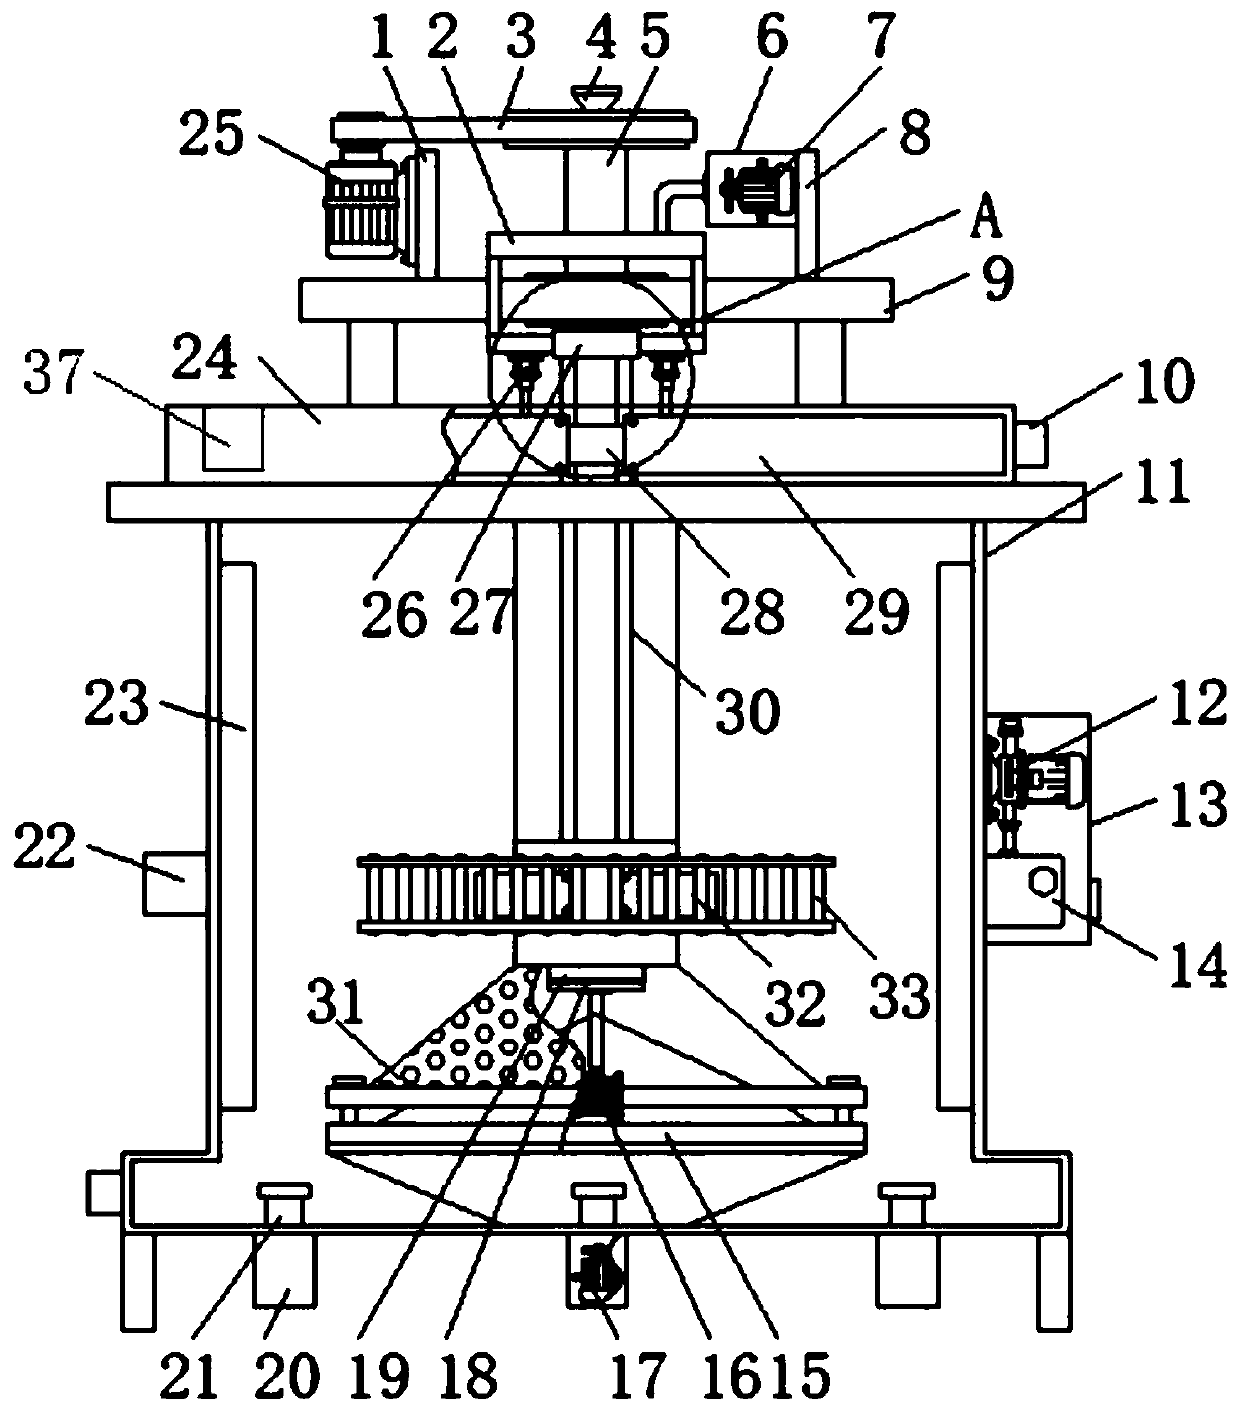 A Flotation Machine for High-precision Separation of Concentrate